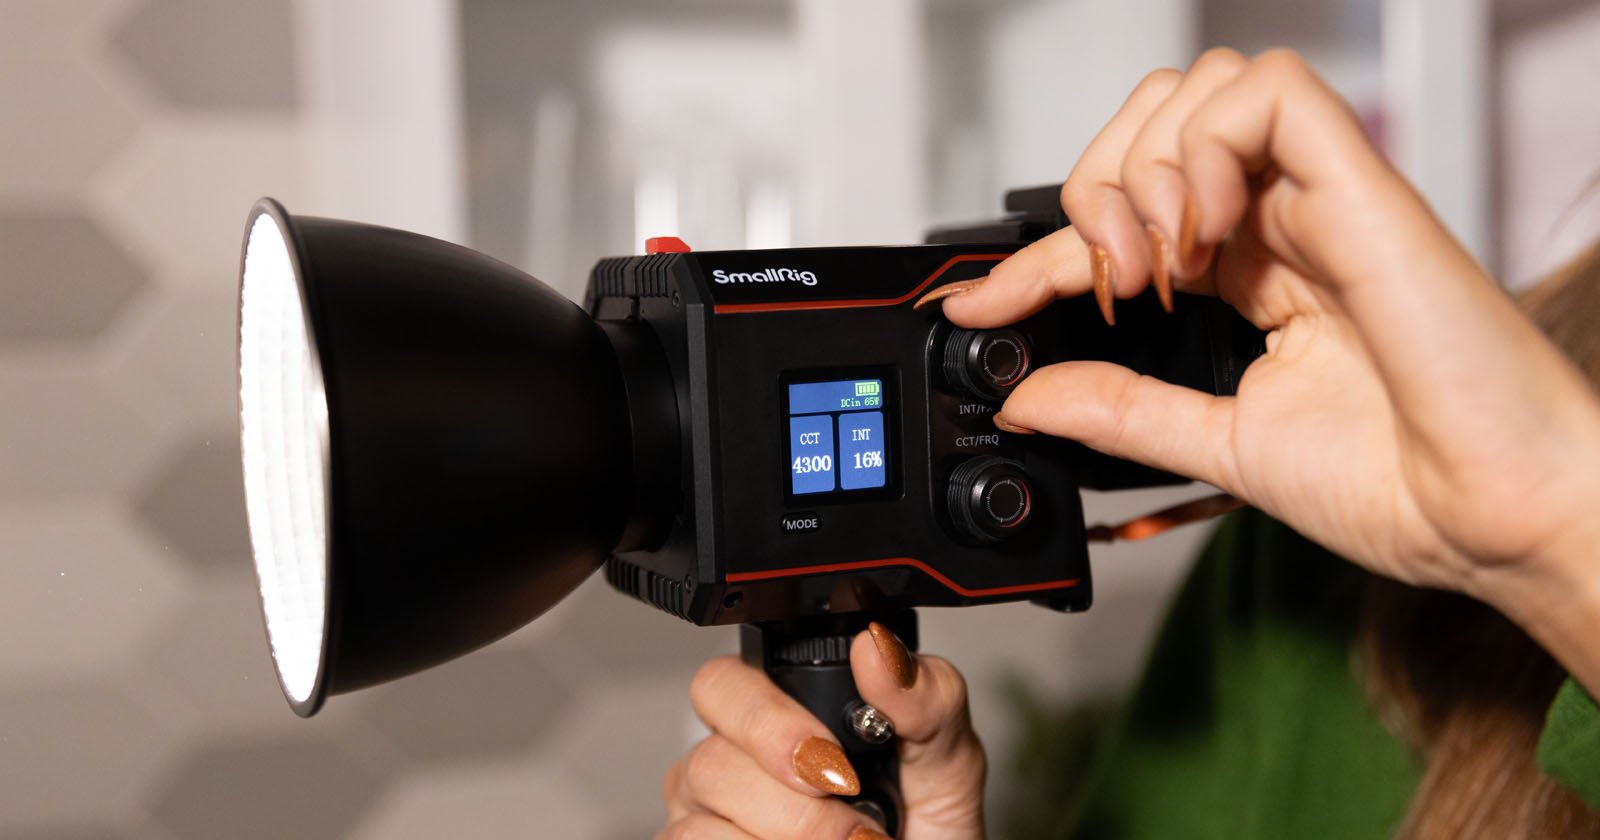 SmallRig’s New Video Light is Small, Lightweight, and Affordable